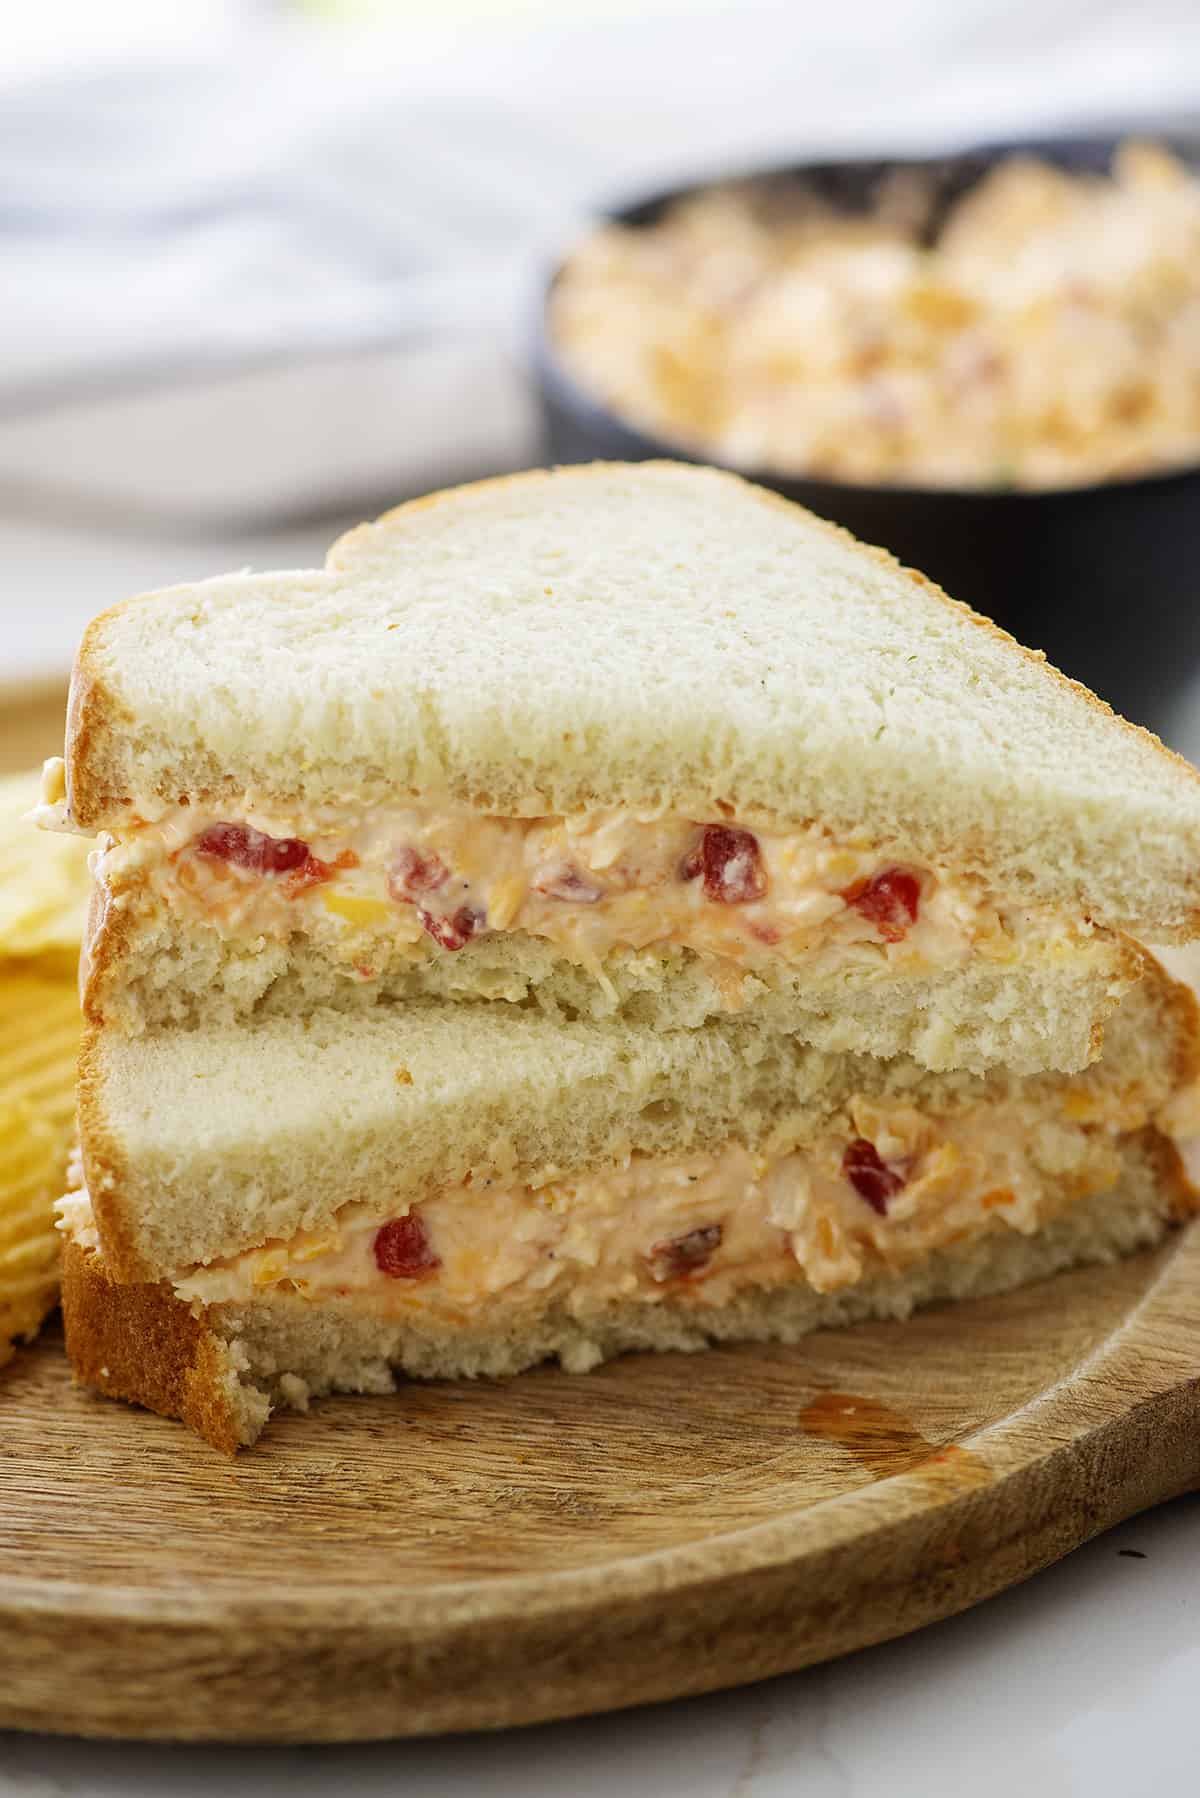 pimento cheese between two slices of bread.